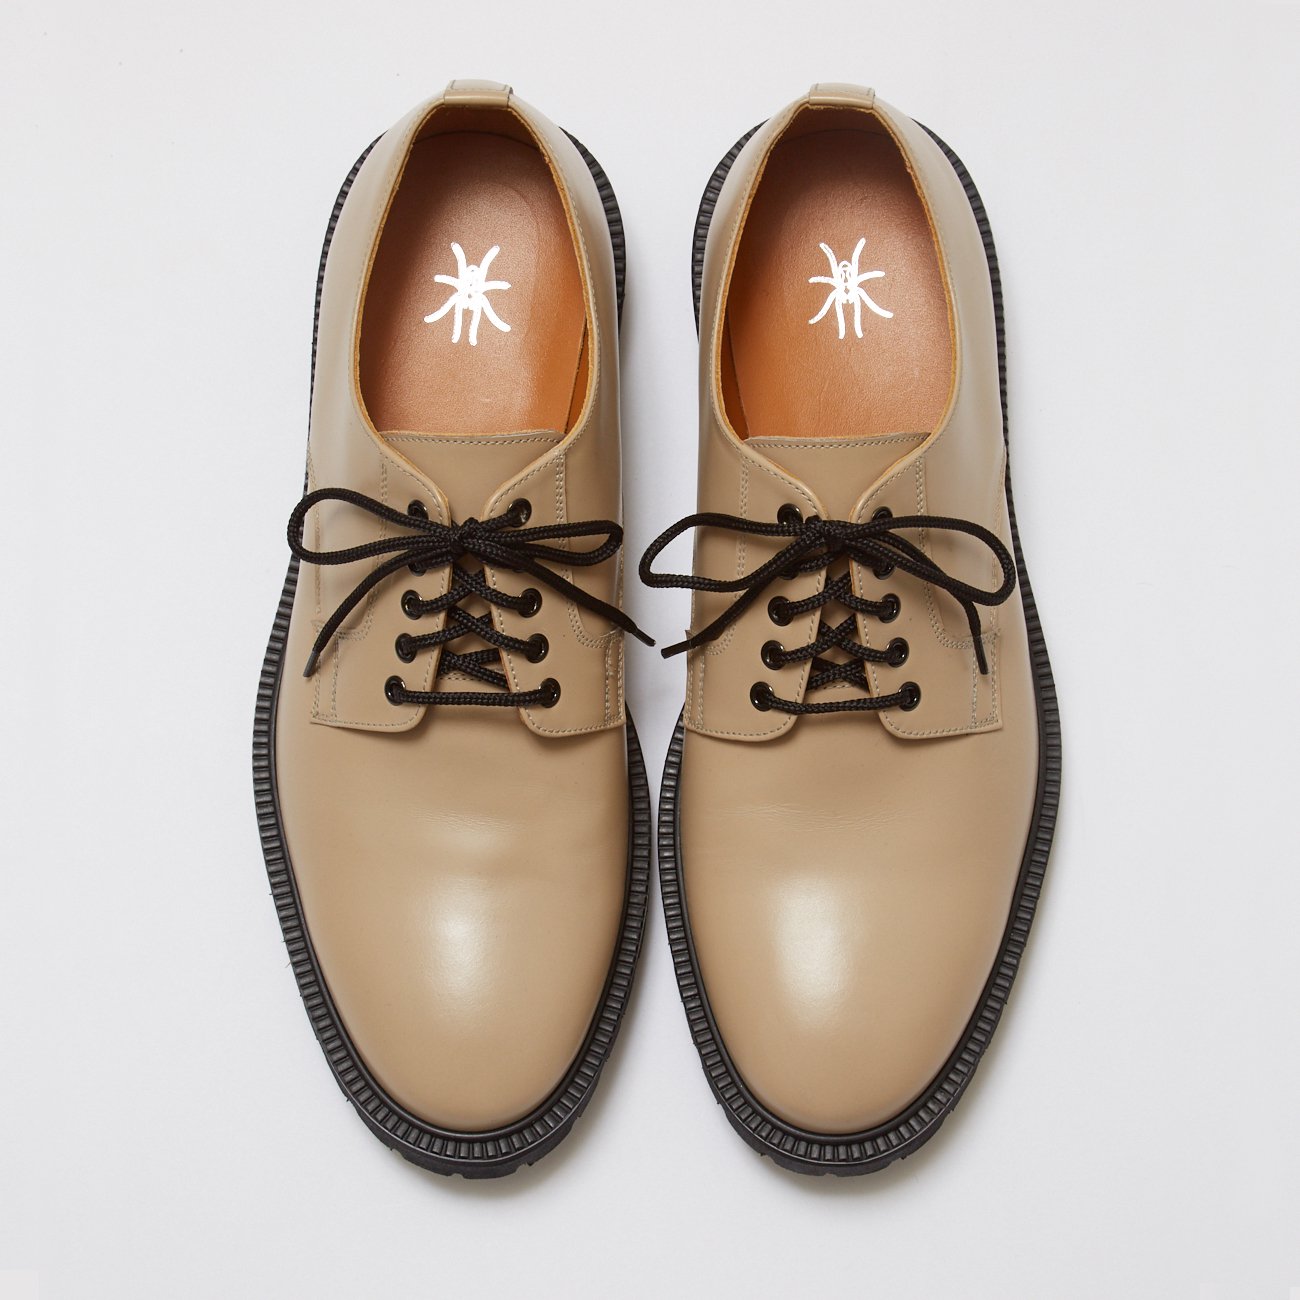 bal バル　BOOT EYELET COMMAND DERBY SHOE